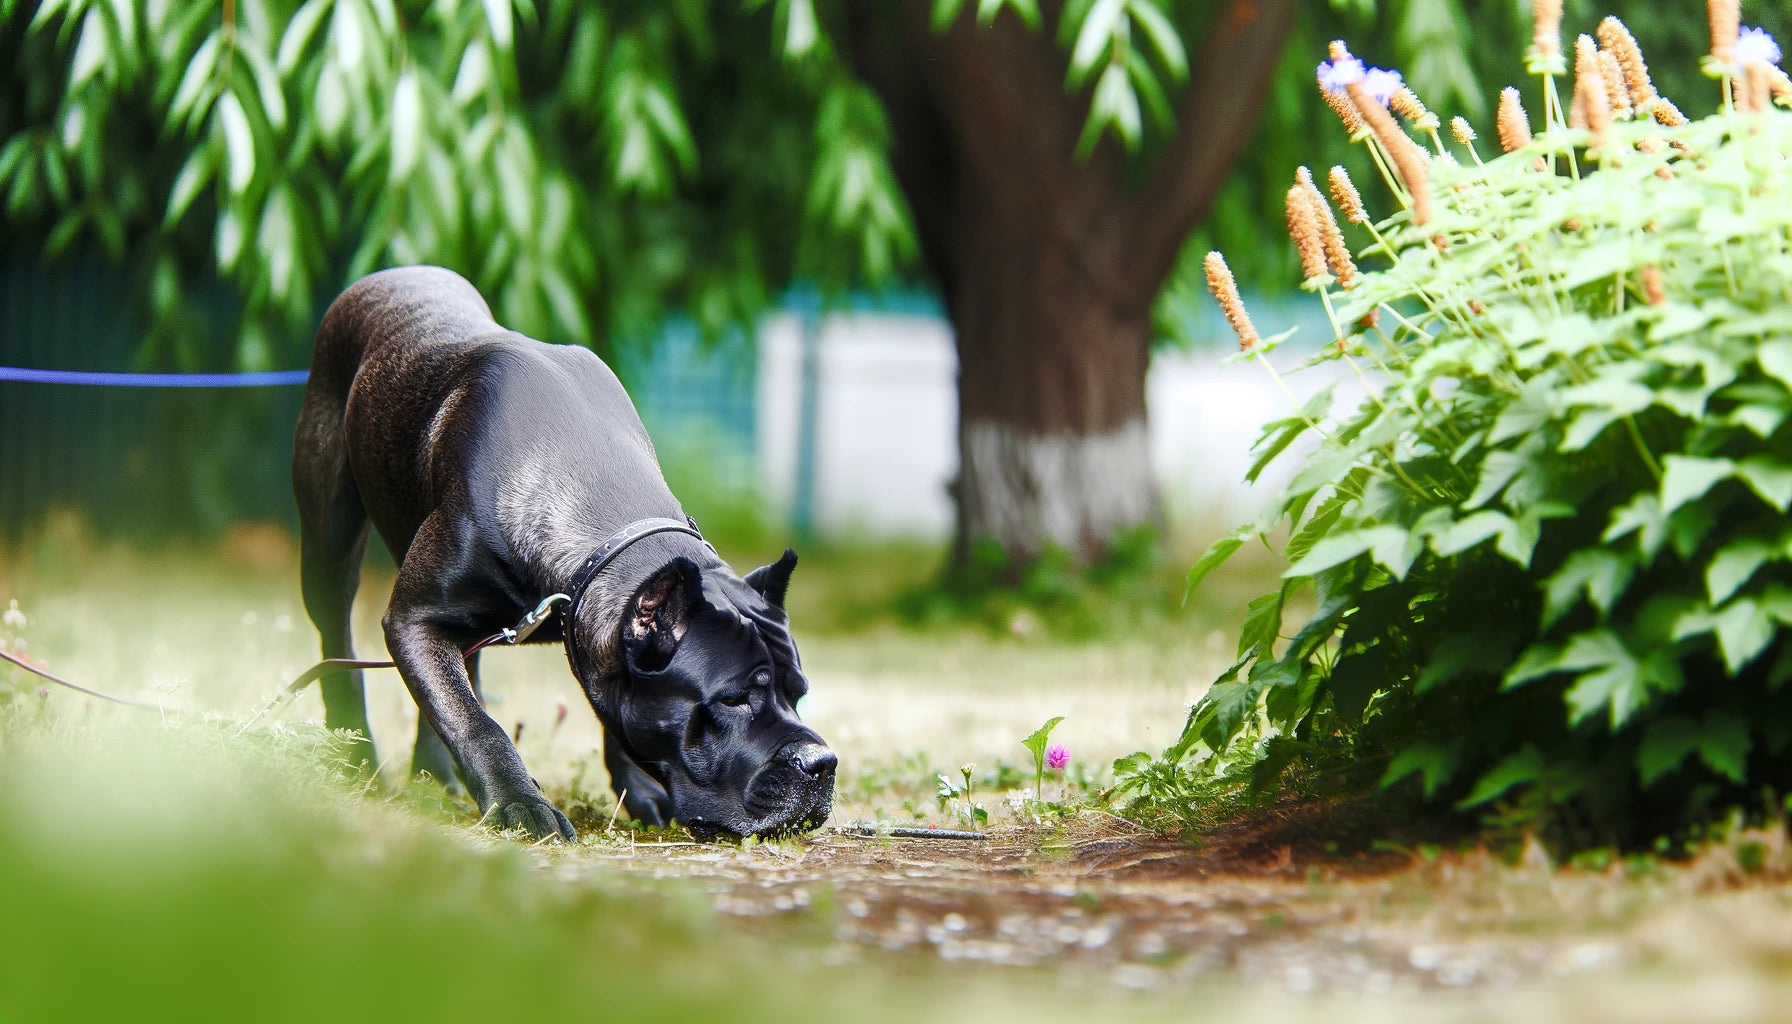 Cane Corso engaging in scent work, focusing intently as it searches for hidden treats or toys.